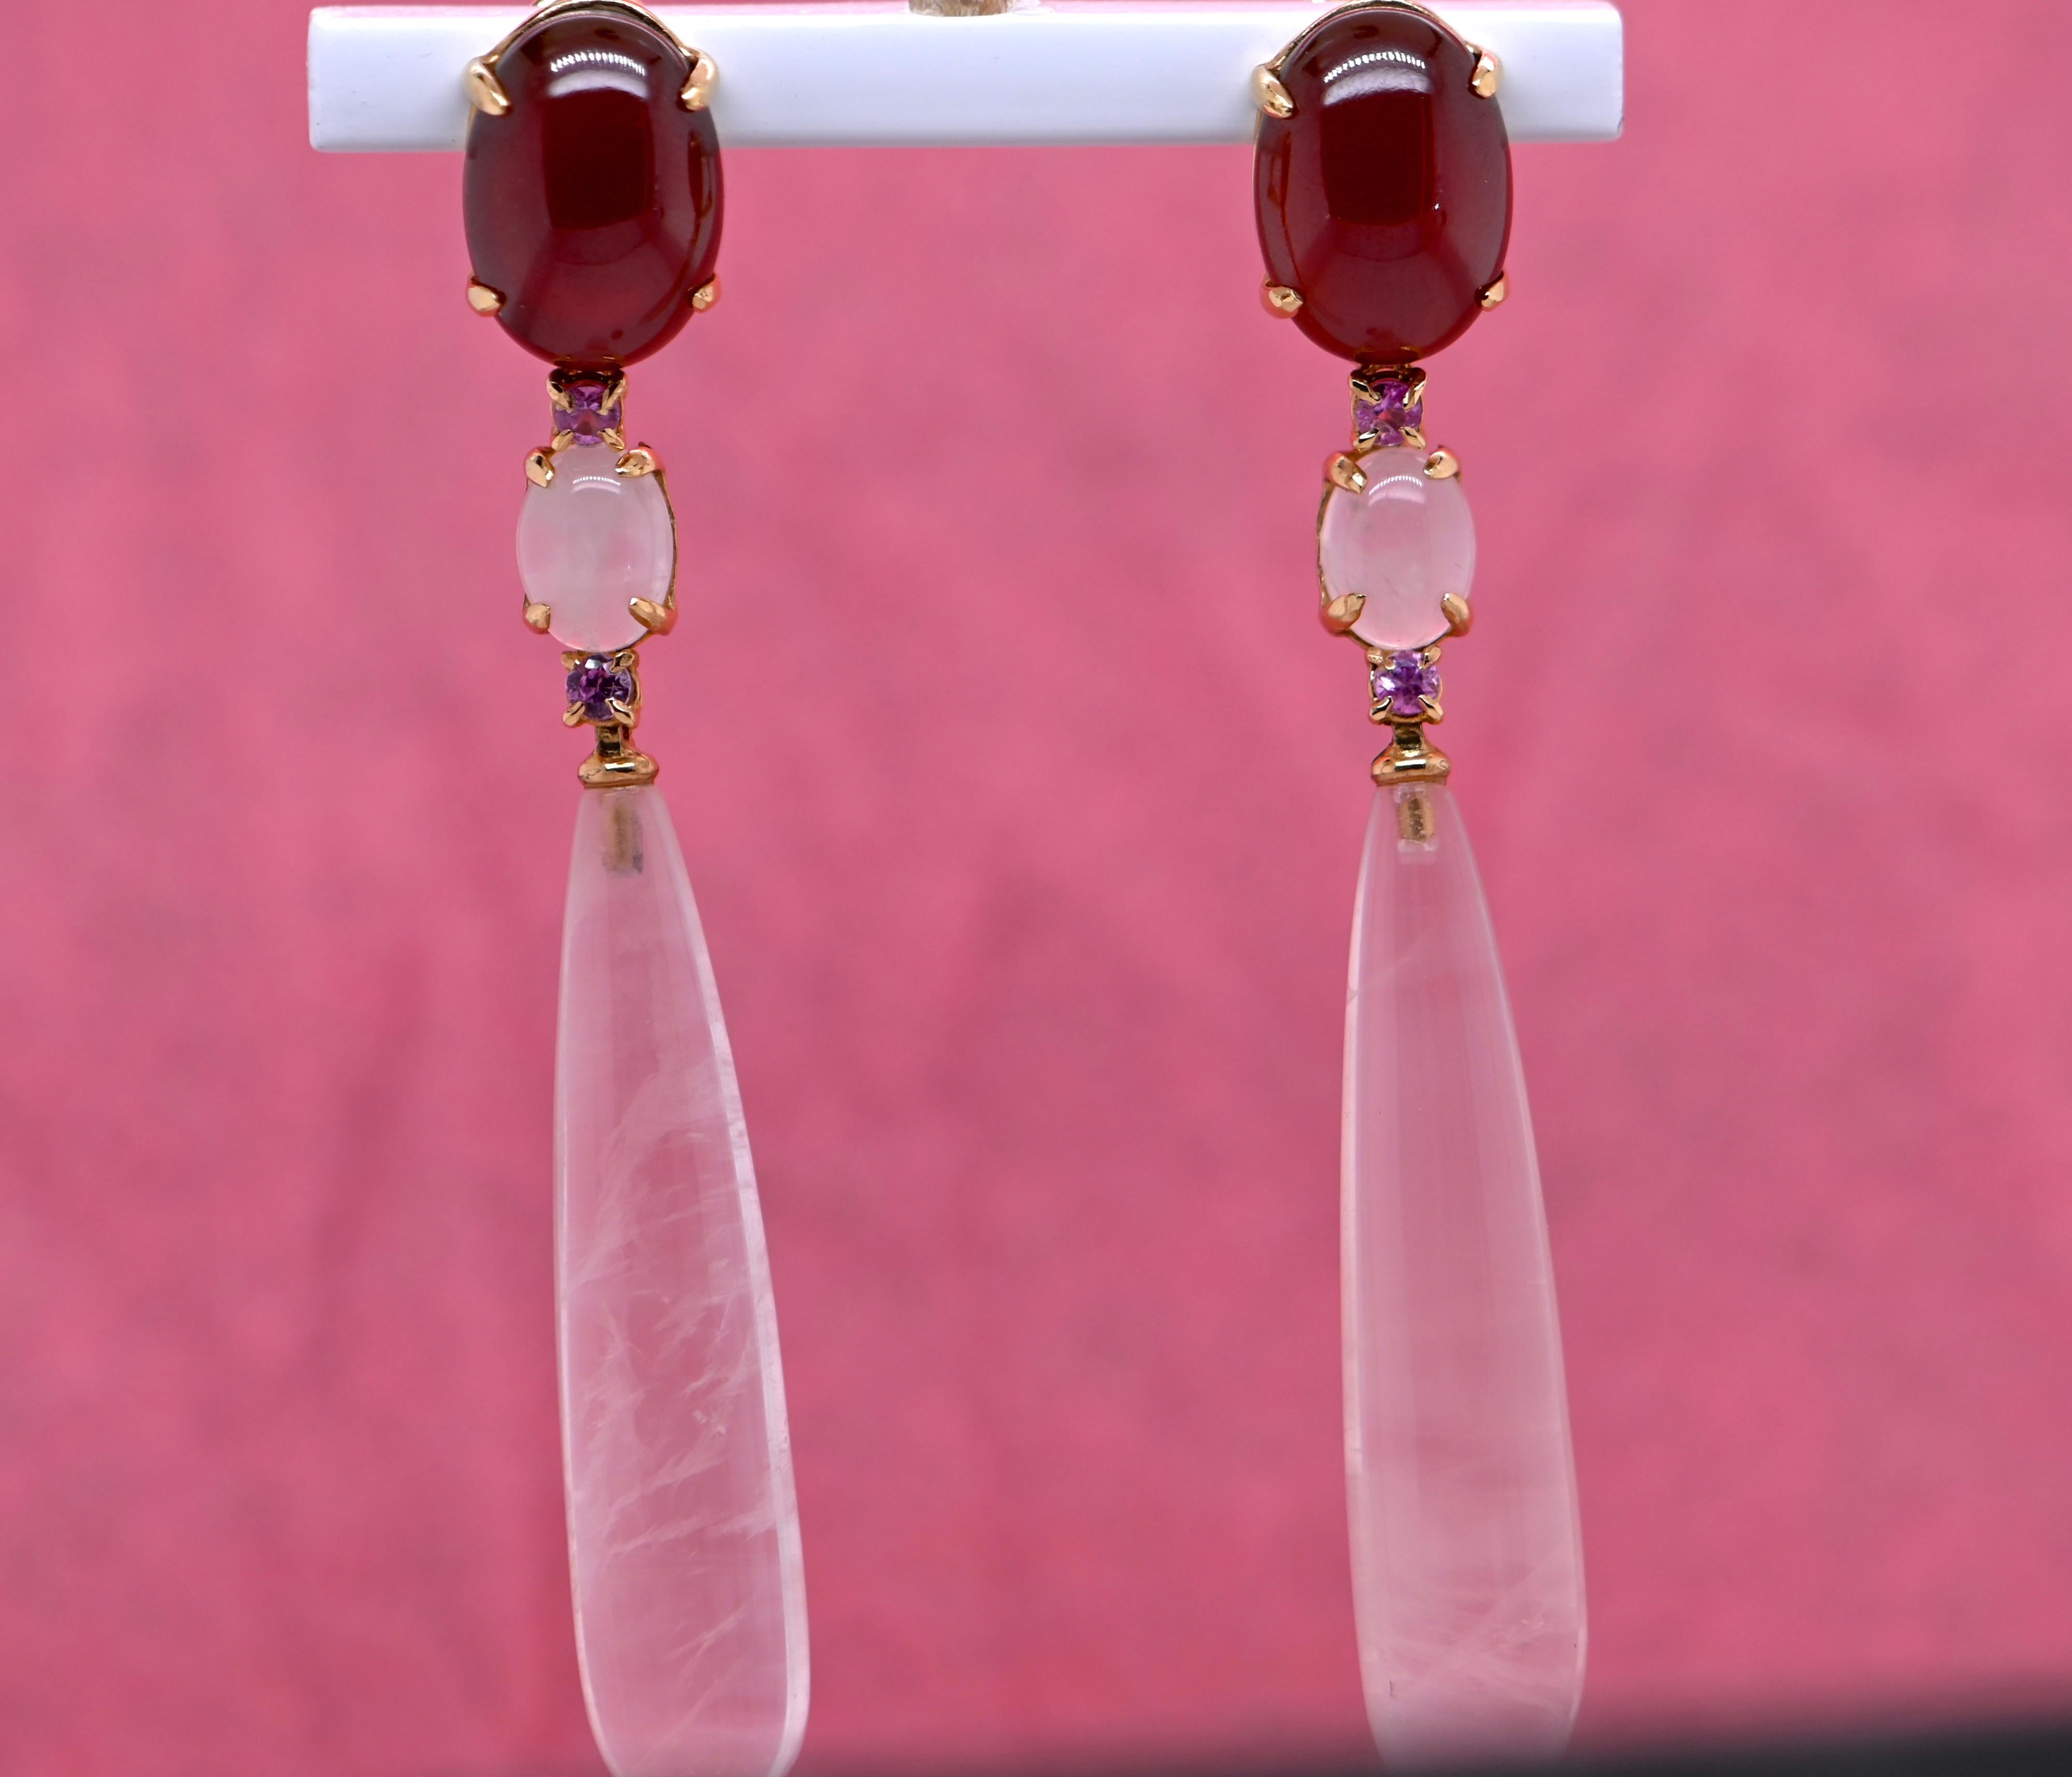 These earrings feature gemstones carefully selected for their natural beauty and mesmerizing brilliance. Two natural garnets, with a rare ruby-red intensity, immediately captivate the eye, adding a touch of passion and mystery to this exceptional